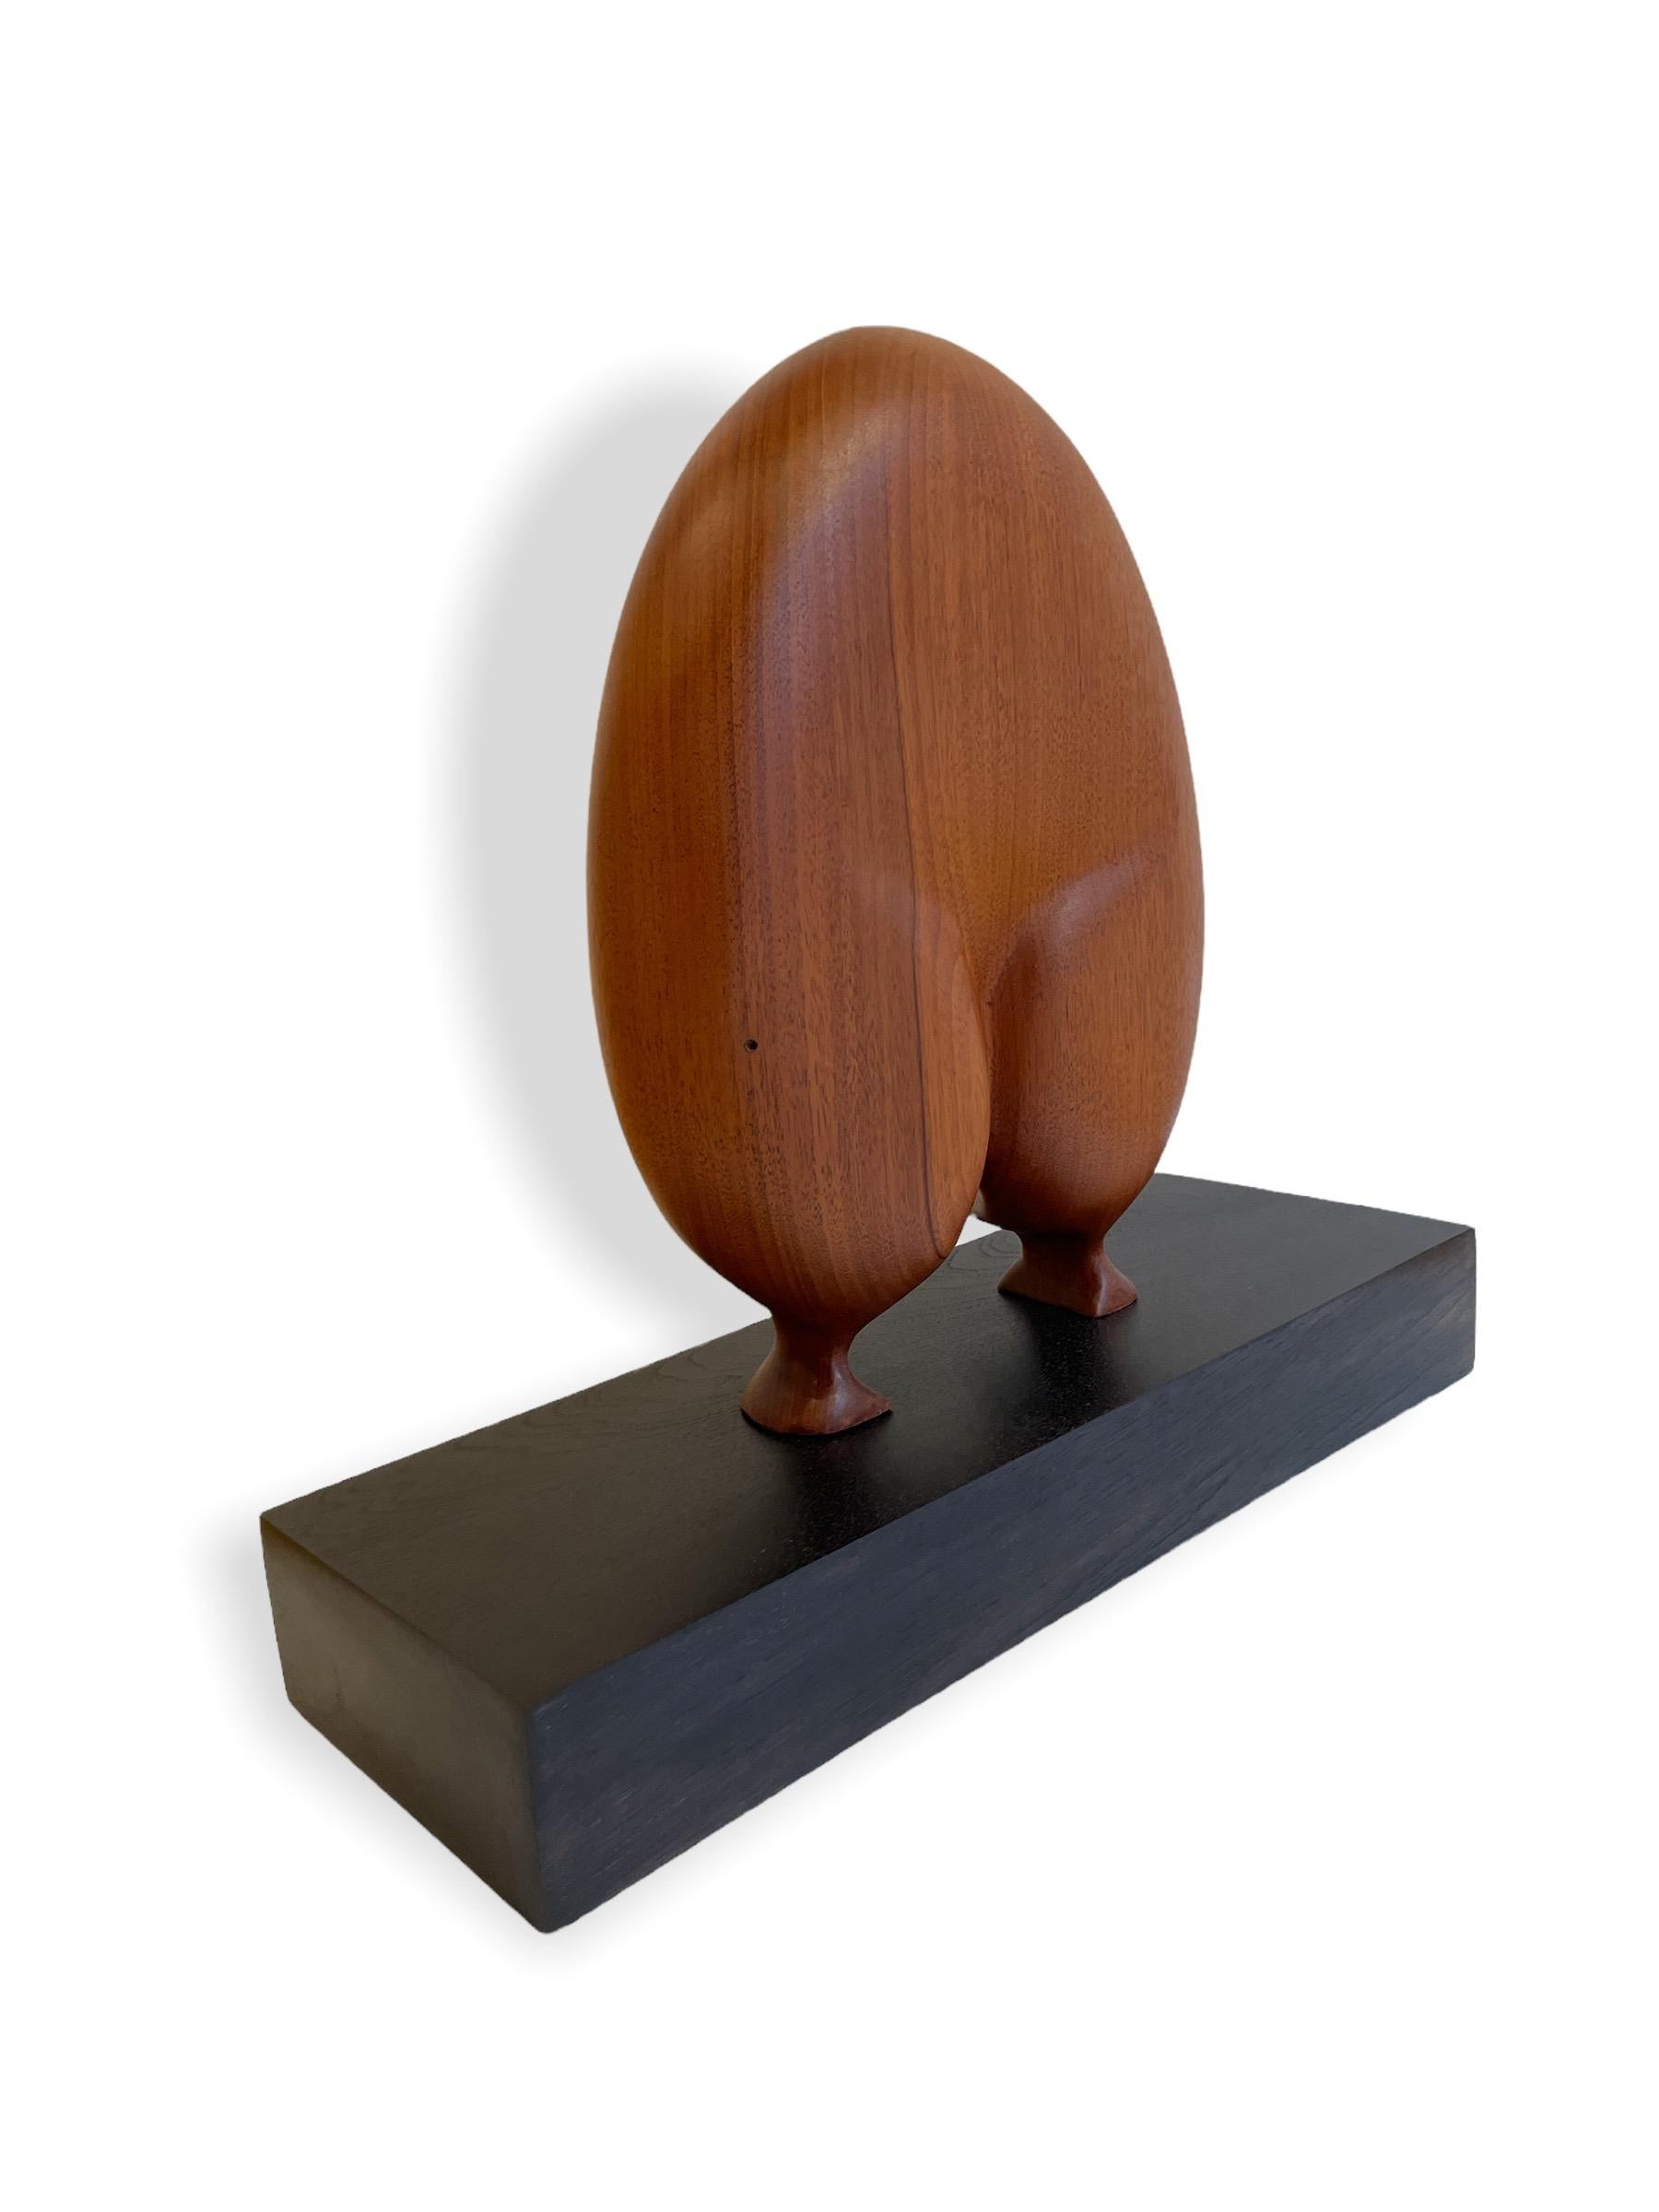 Modern Submission, Mahogany, Hand Carved Wooden Sculpture on Dark Base